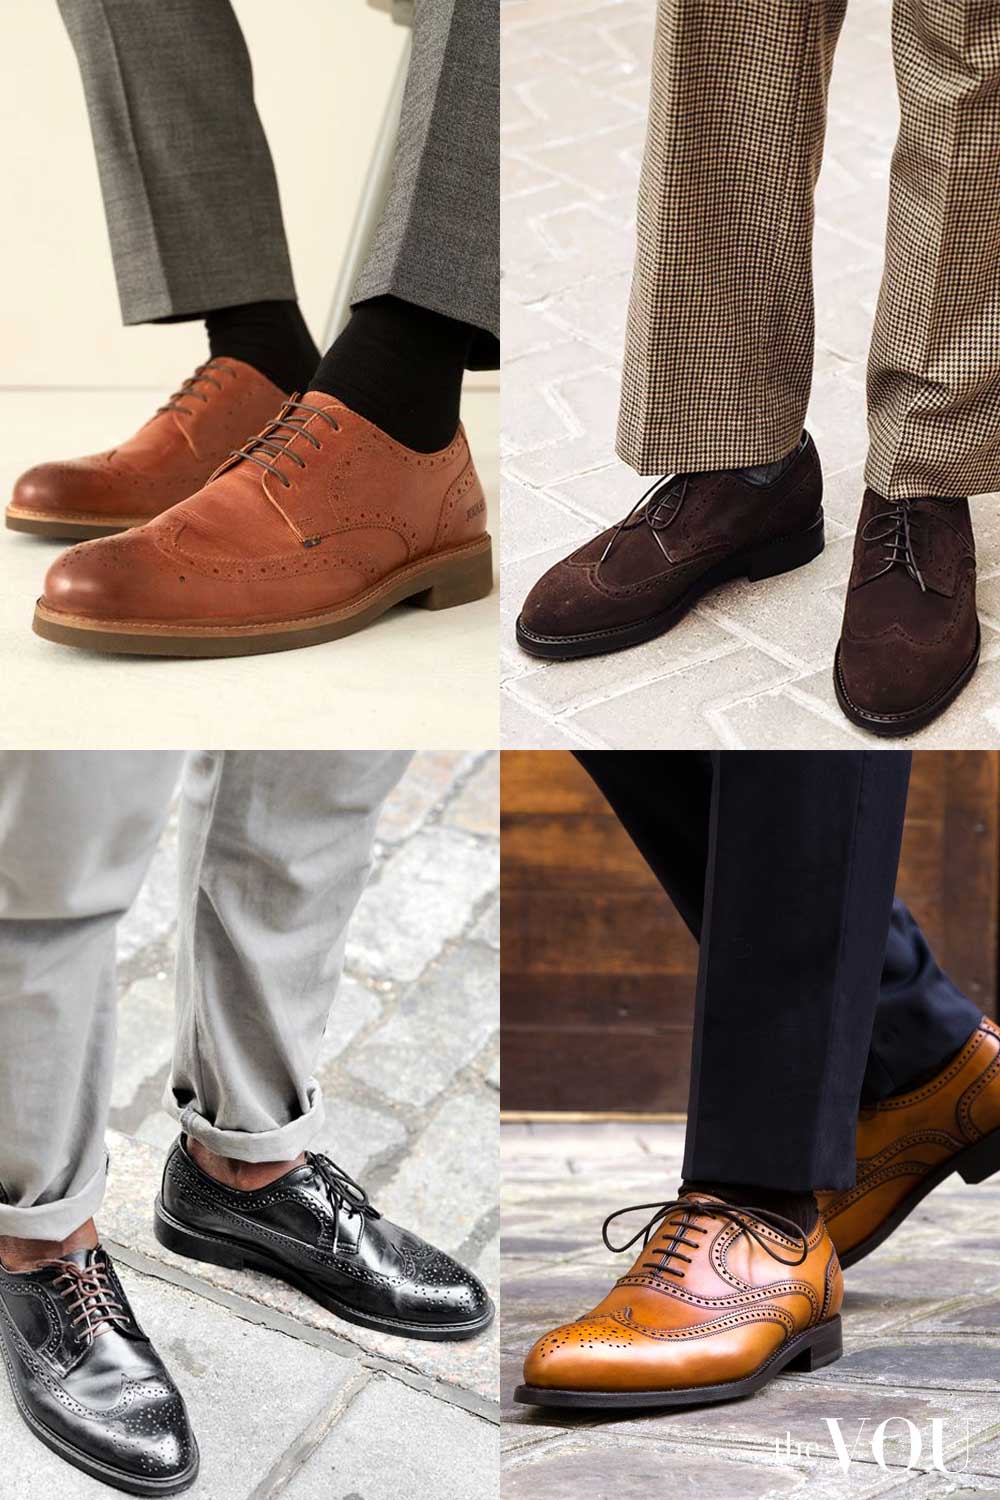 Business casual Old Money style Brogues shoes